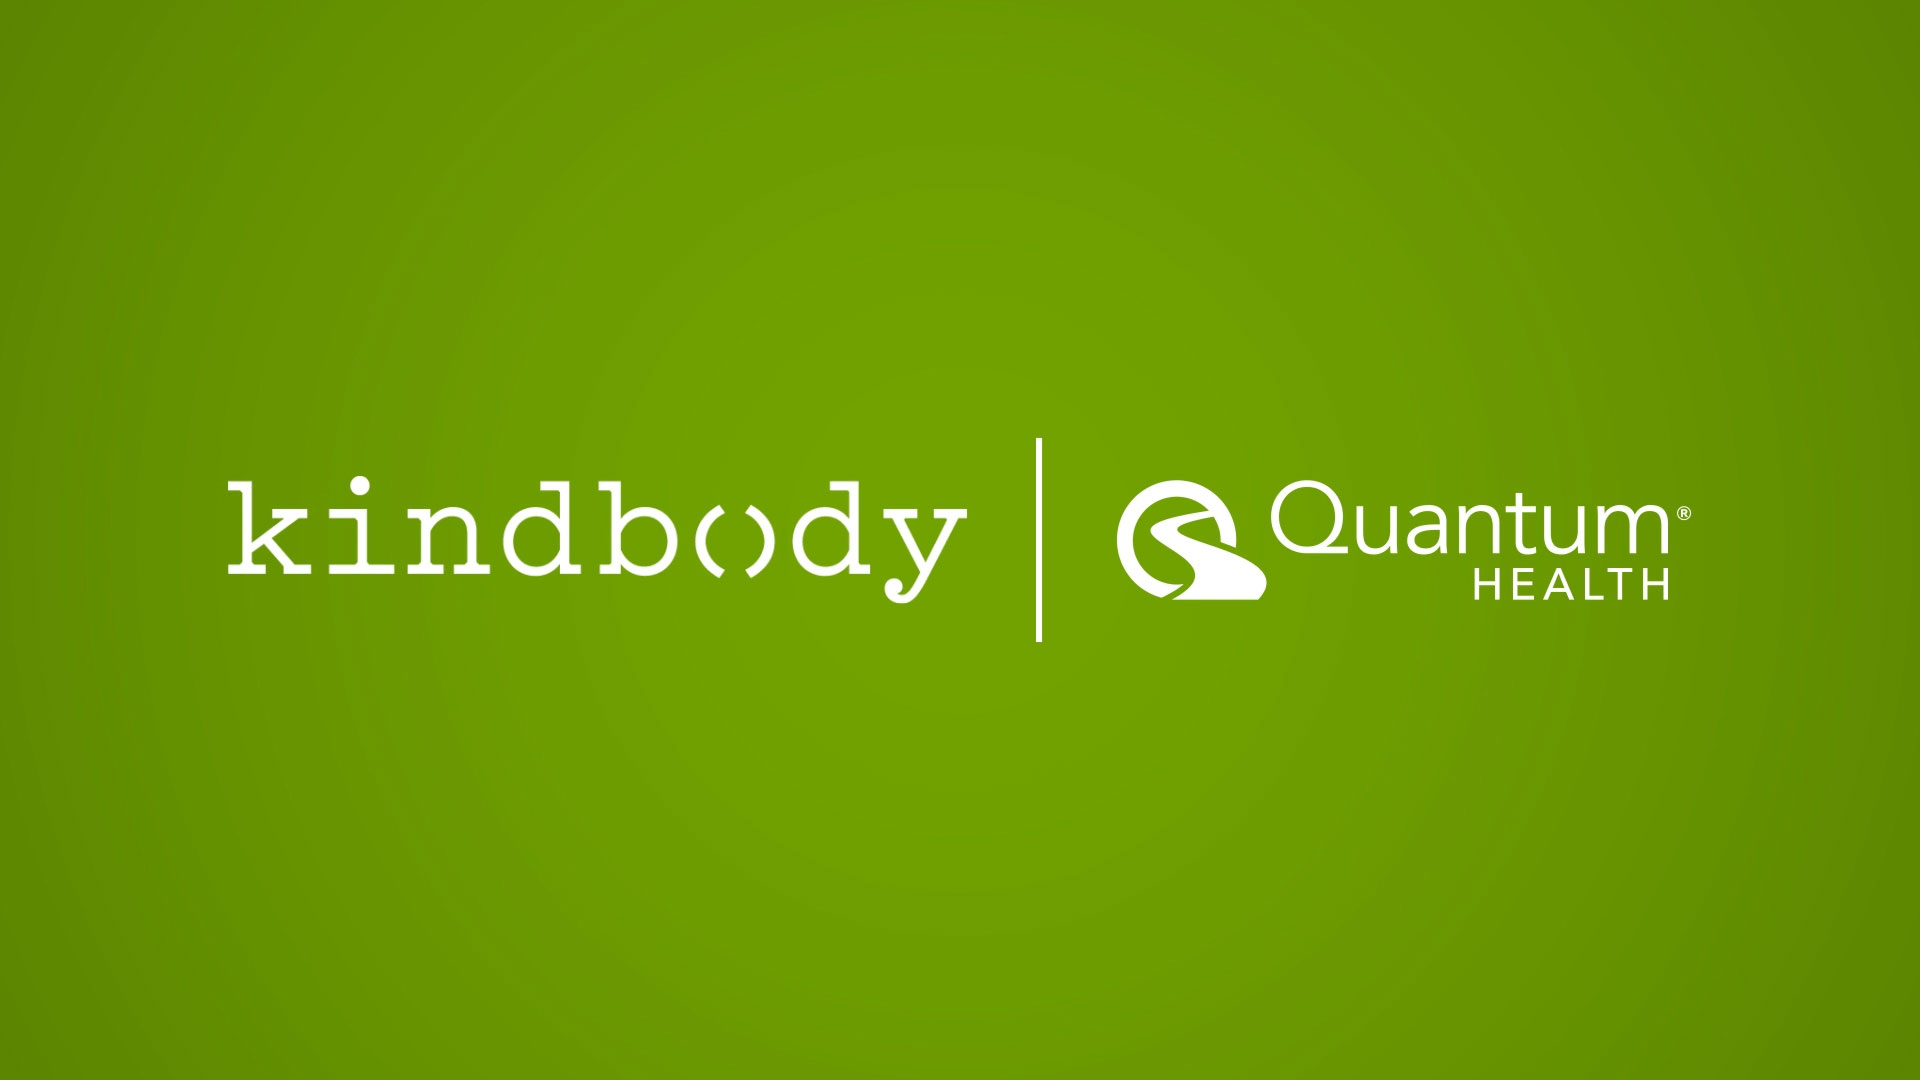 Quantum Health is proud to partner with Kindbody.